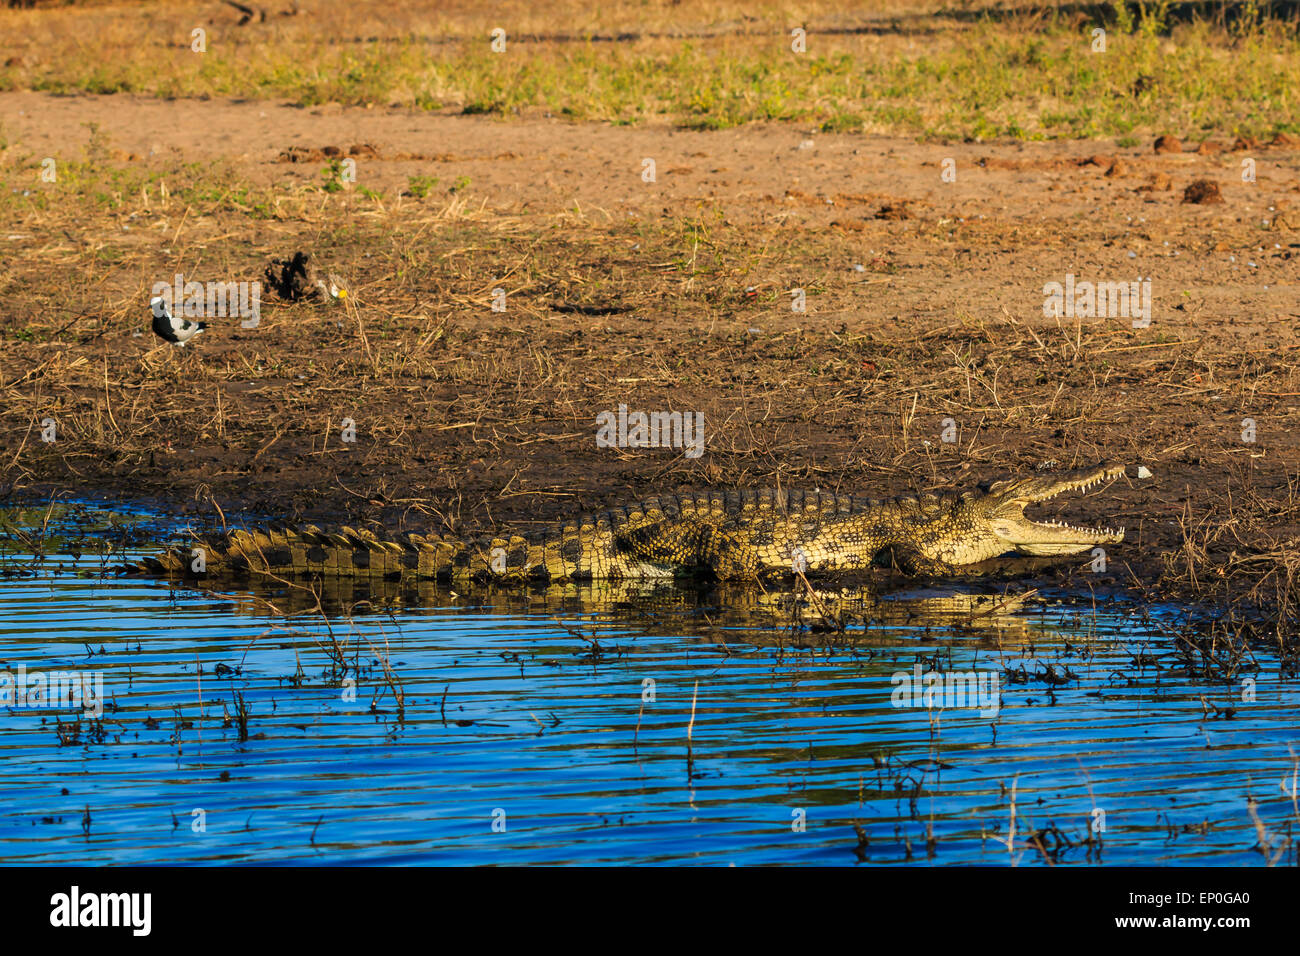 Big crocodile resting and cooling on riverfront Chobe, Botswana, Africa. Bird is a few meters away and has no fear. Stock Photo